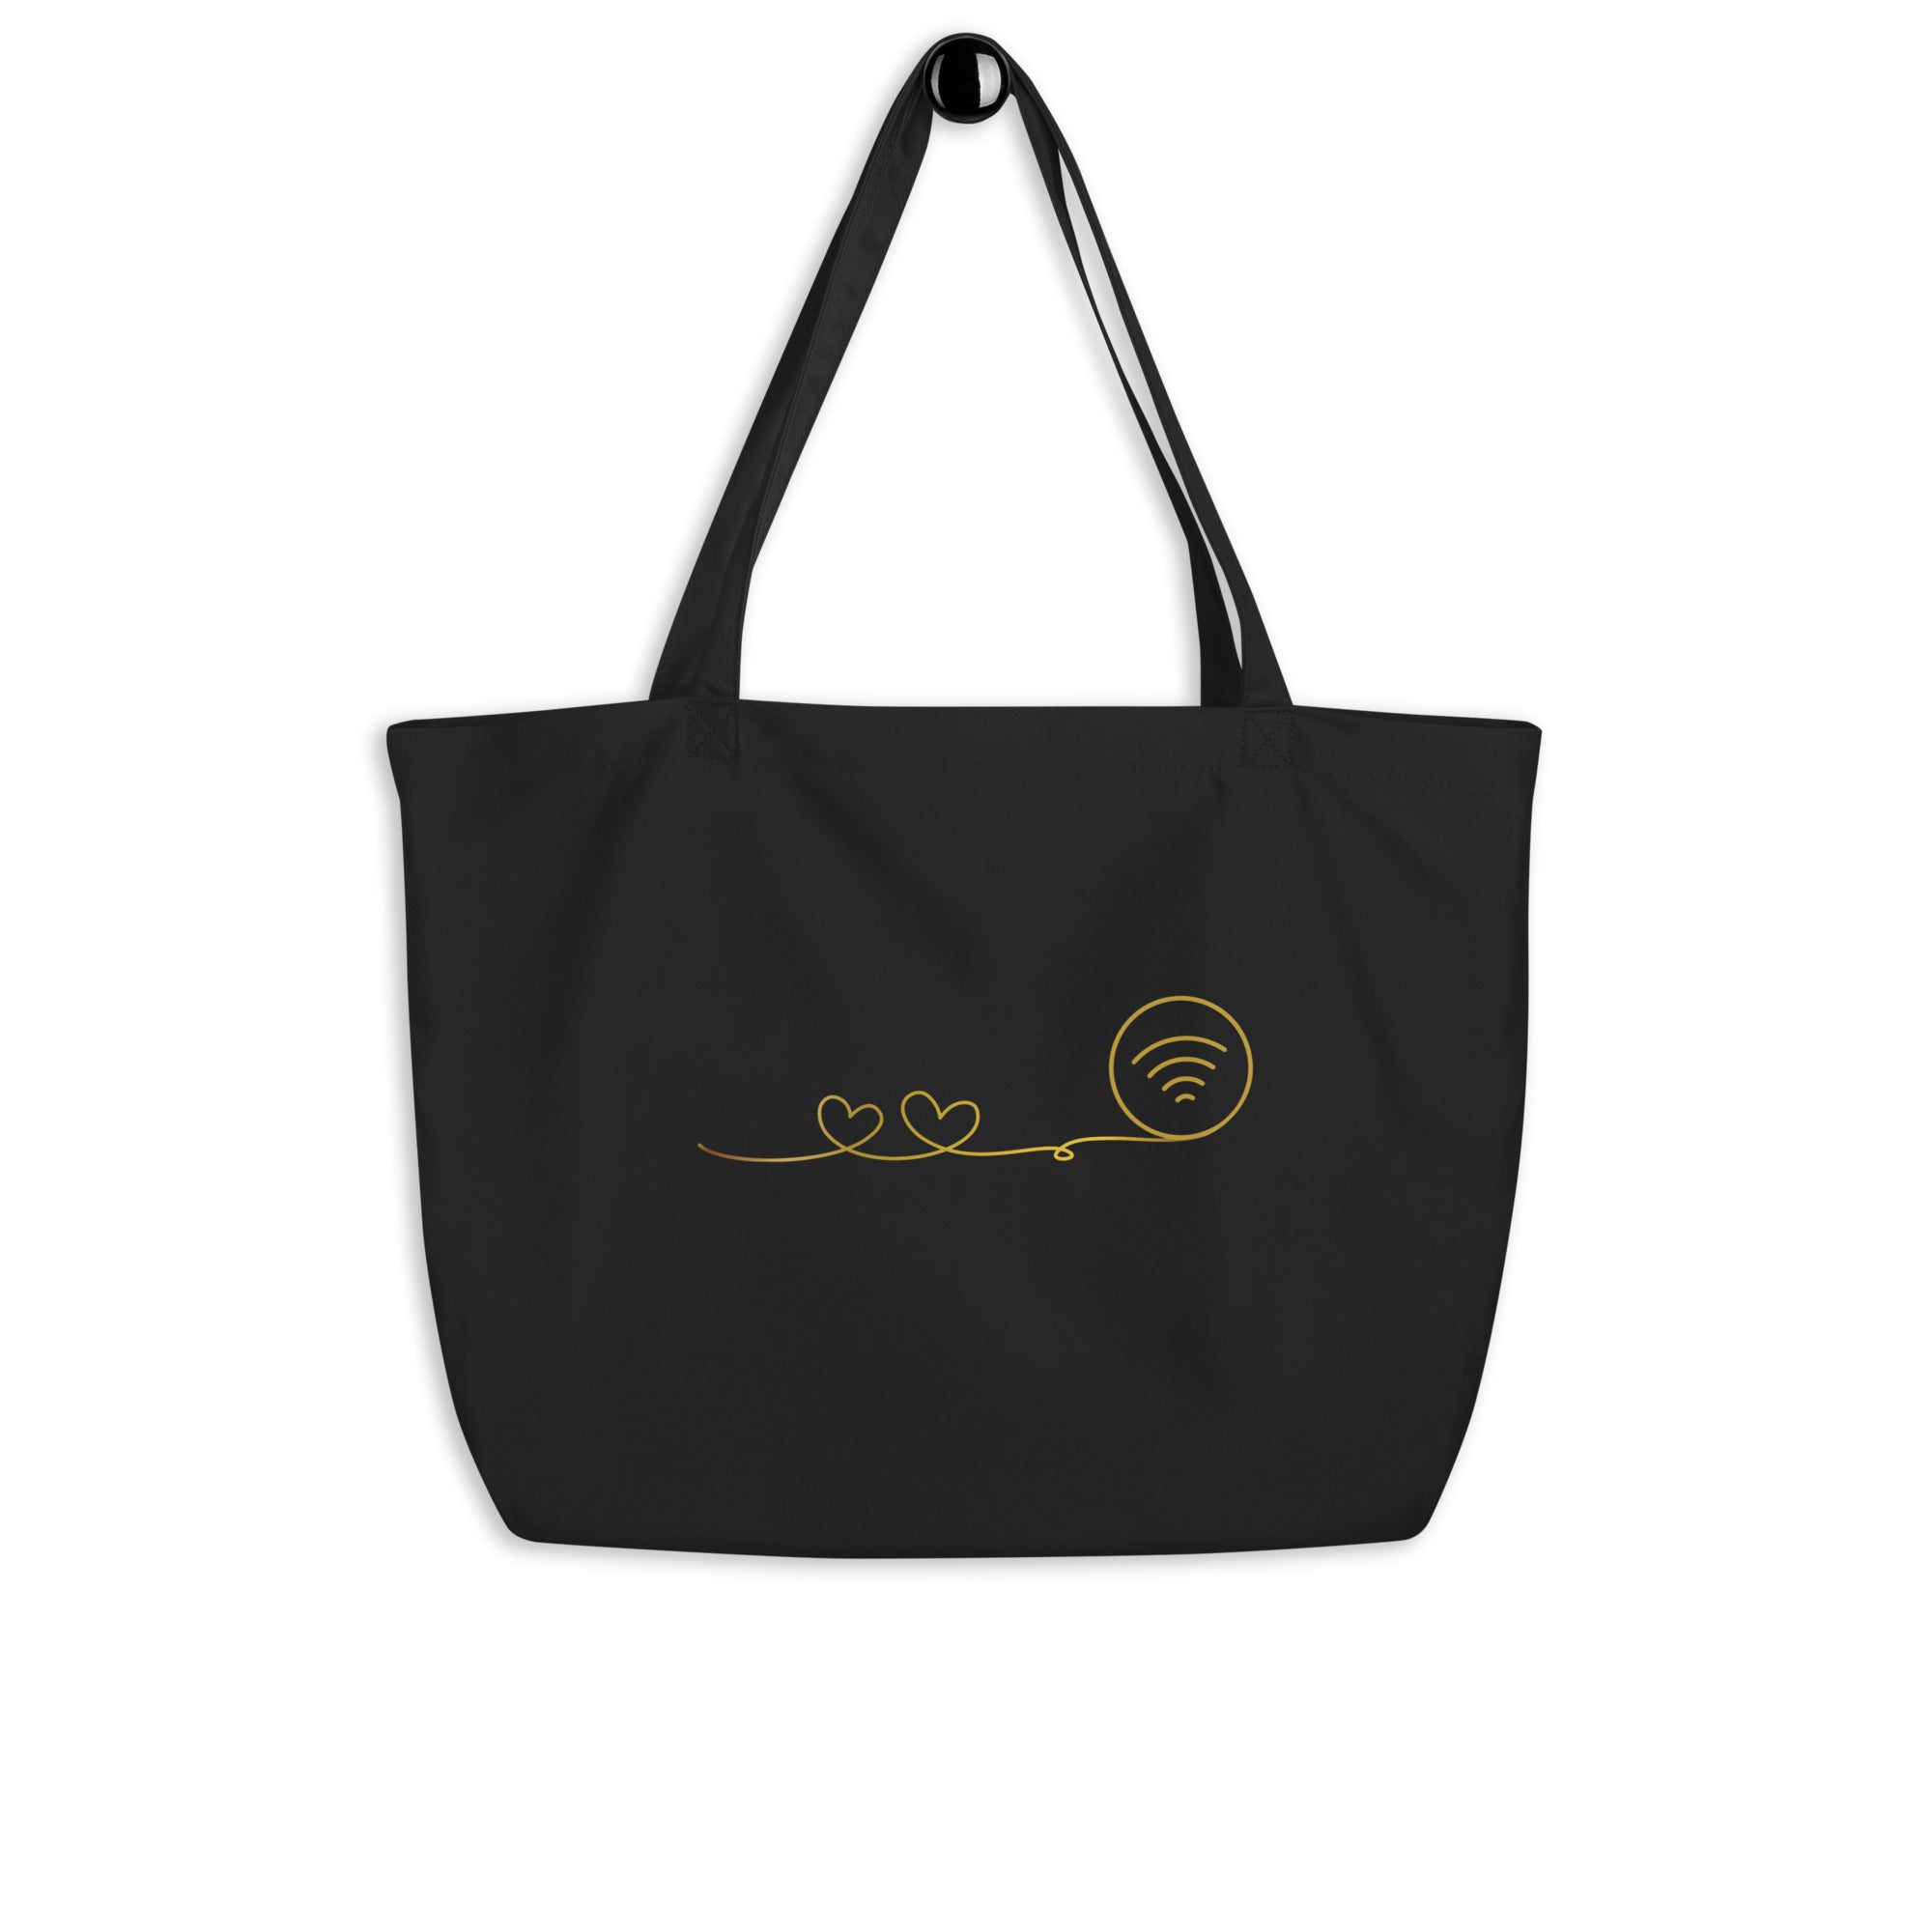 Connected Heart Large organic tote bag